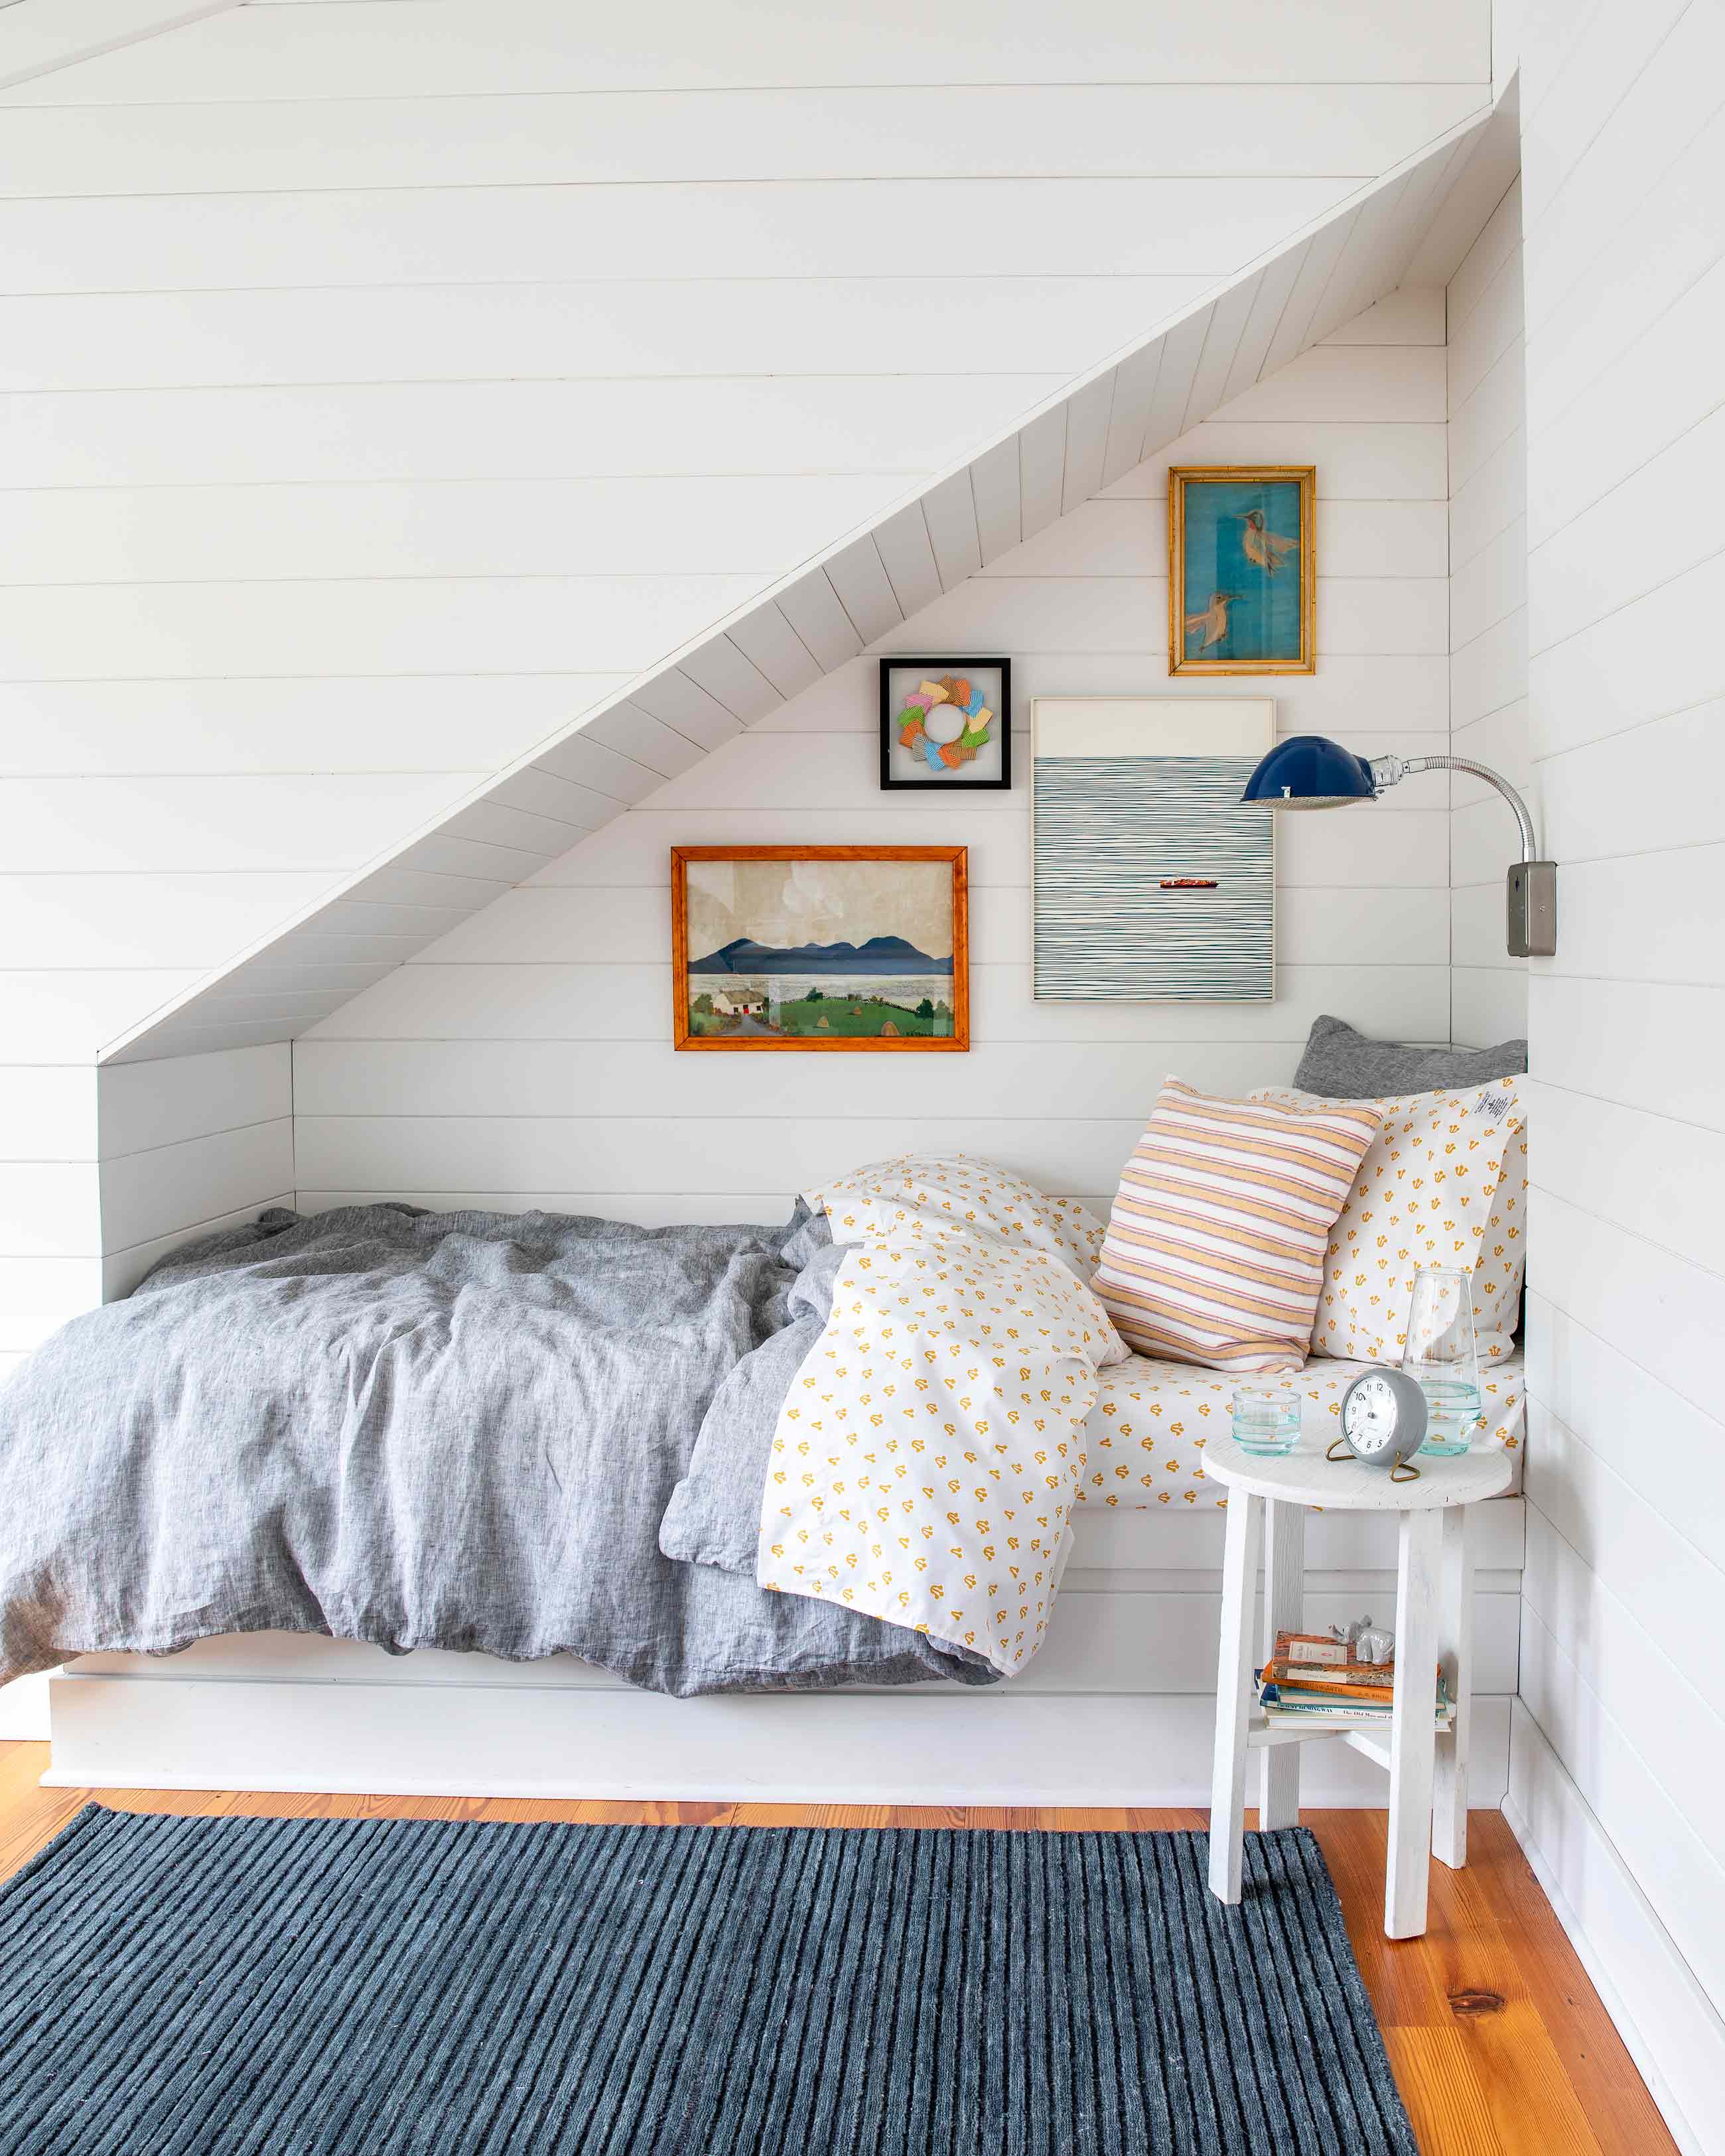 Kid's bedroom nook with patterned bedding and navy rug